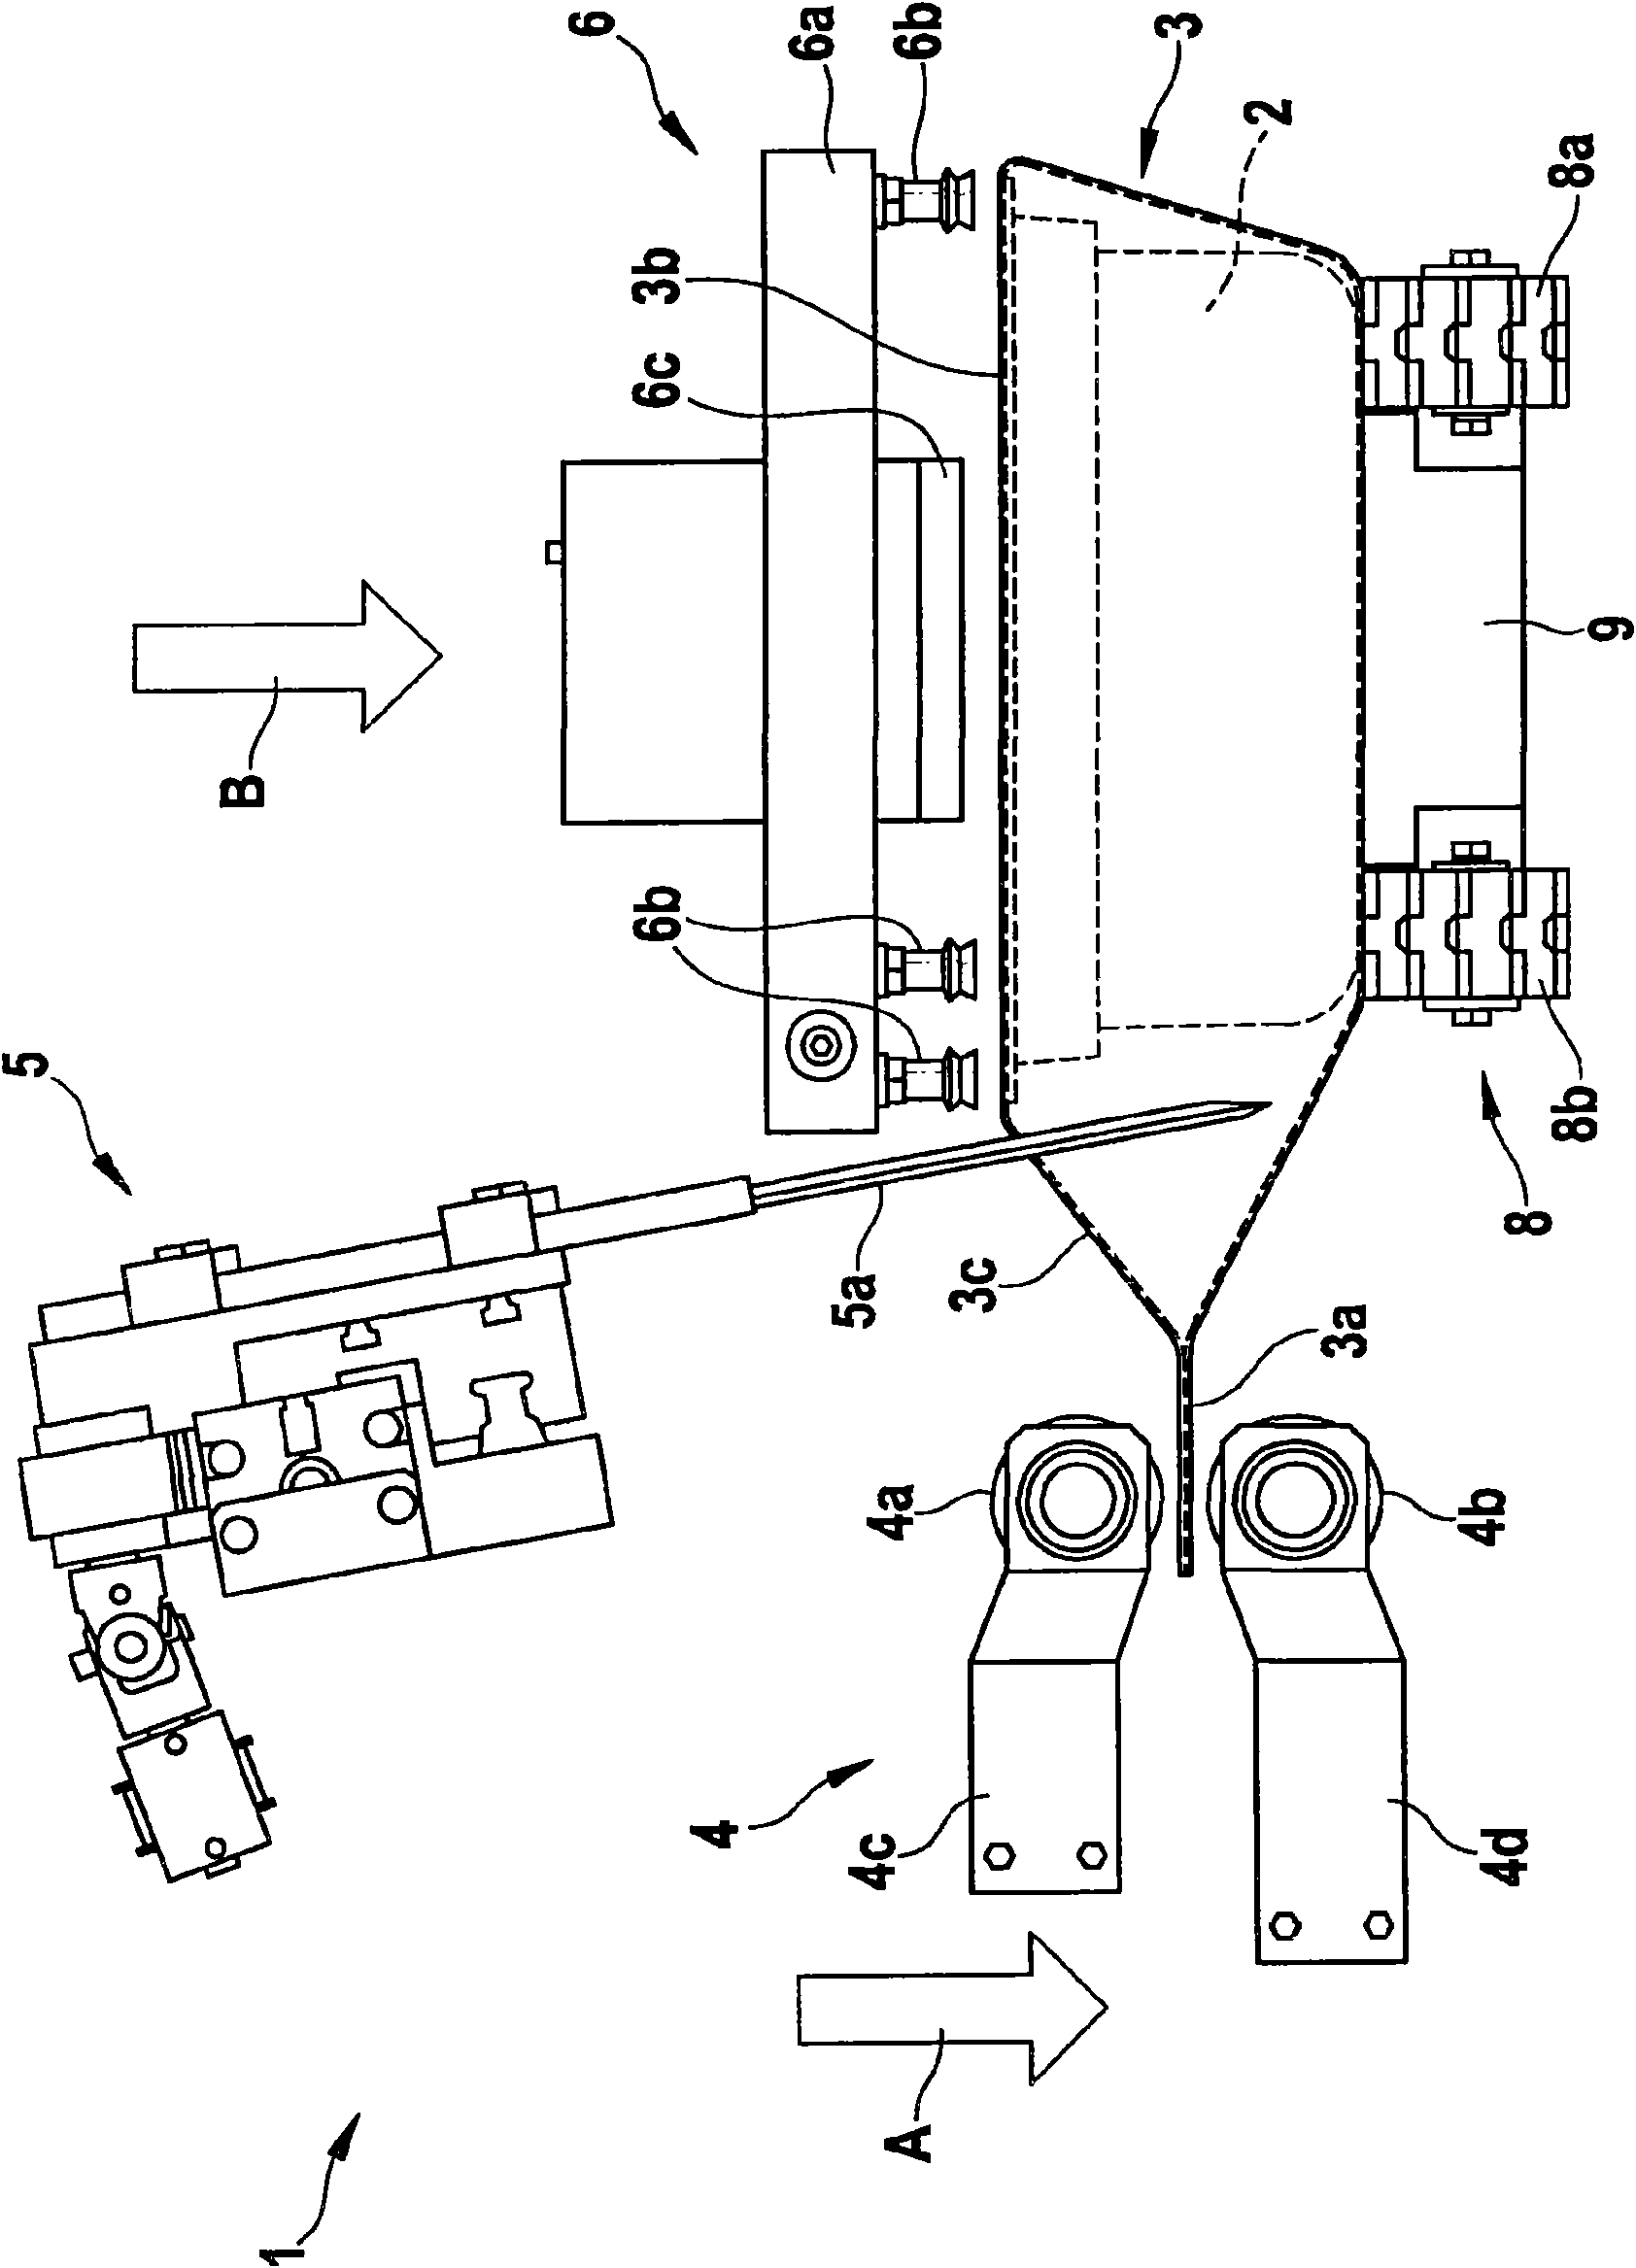 Device and method for removing a sterile object from a sterile packaging